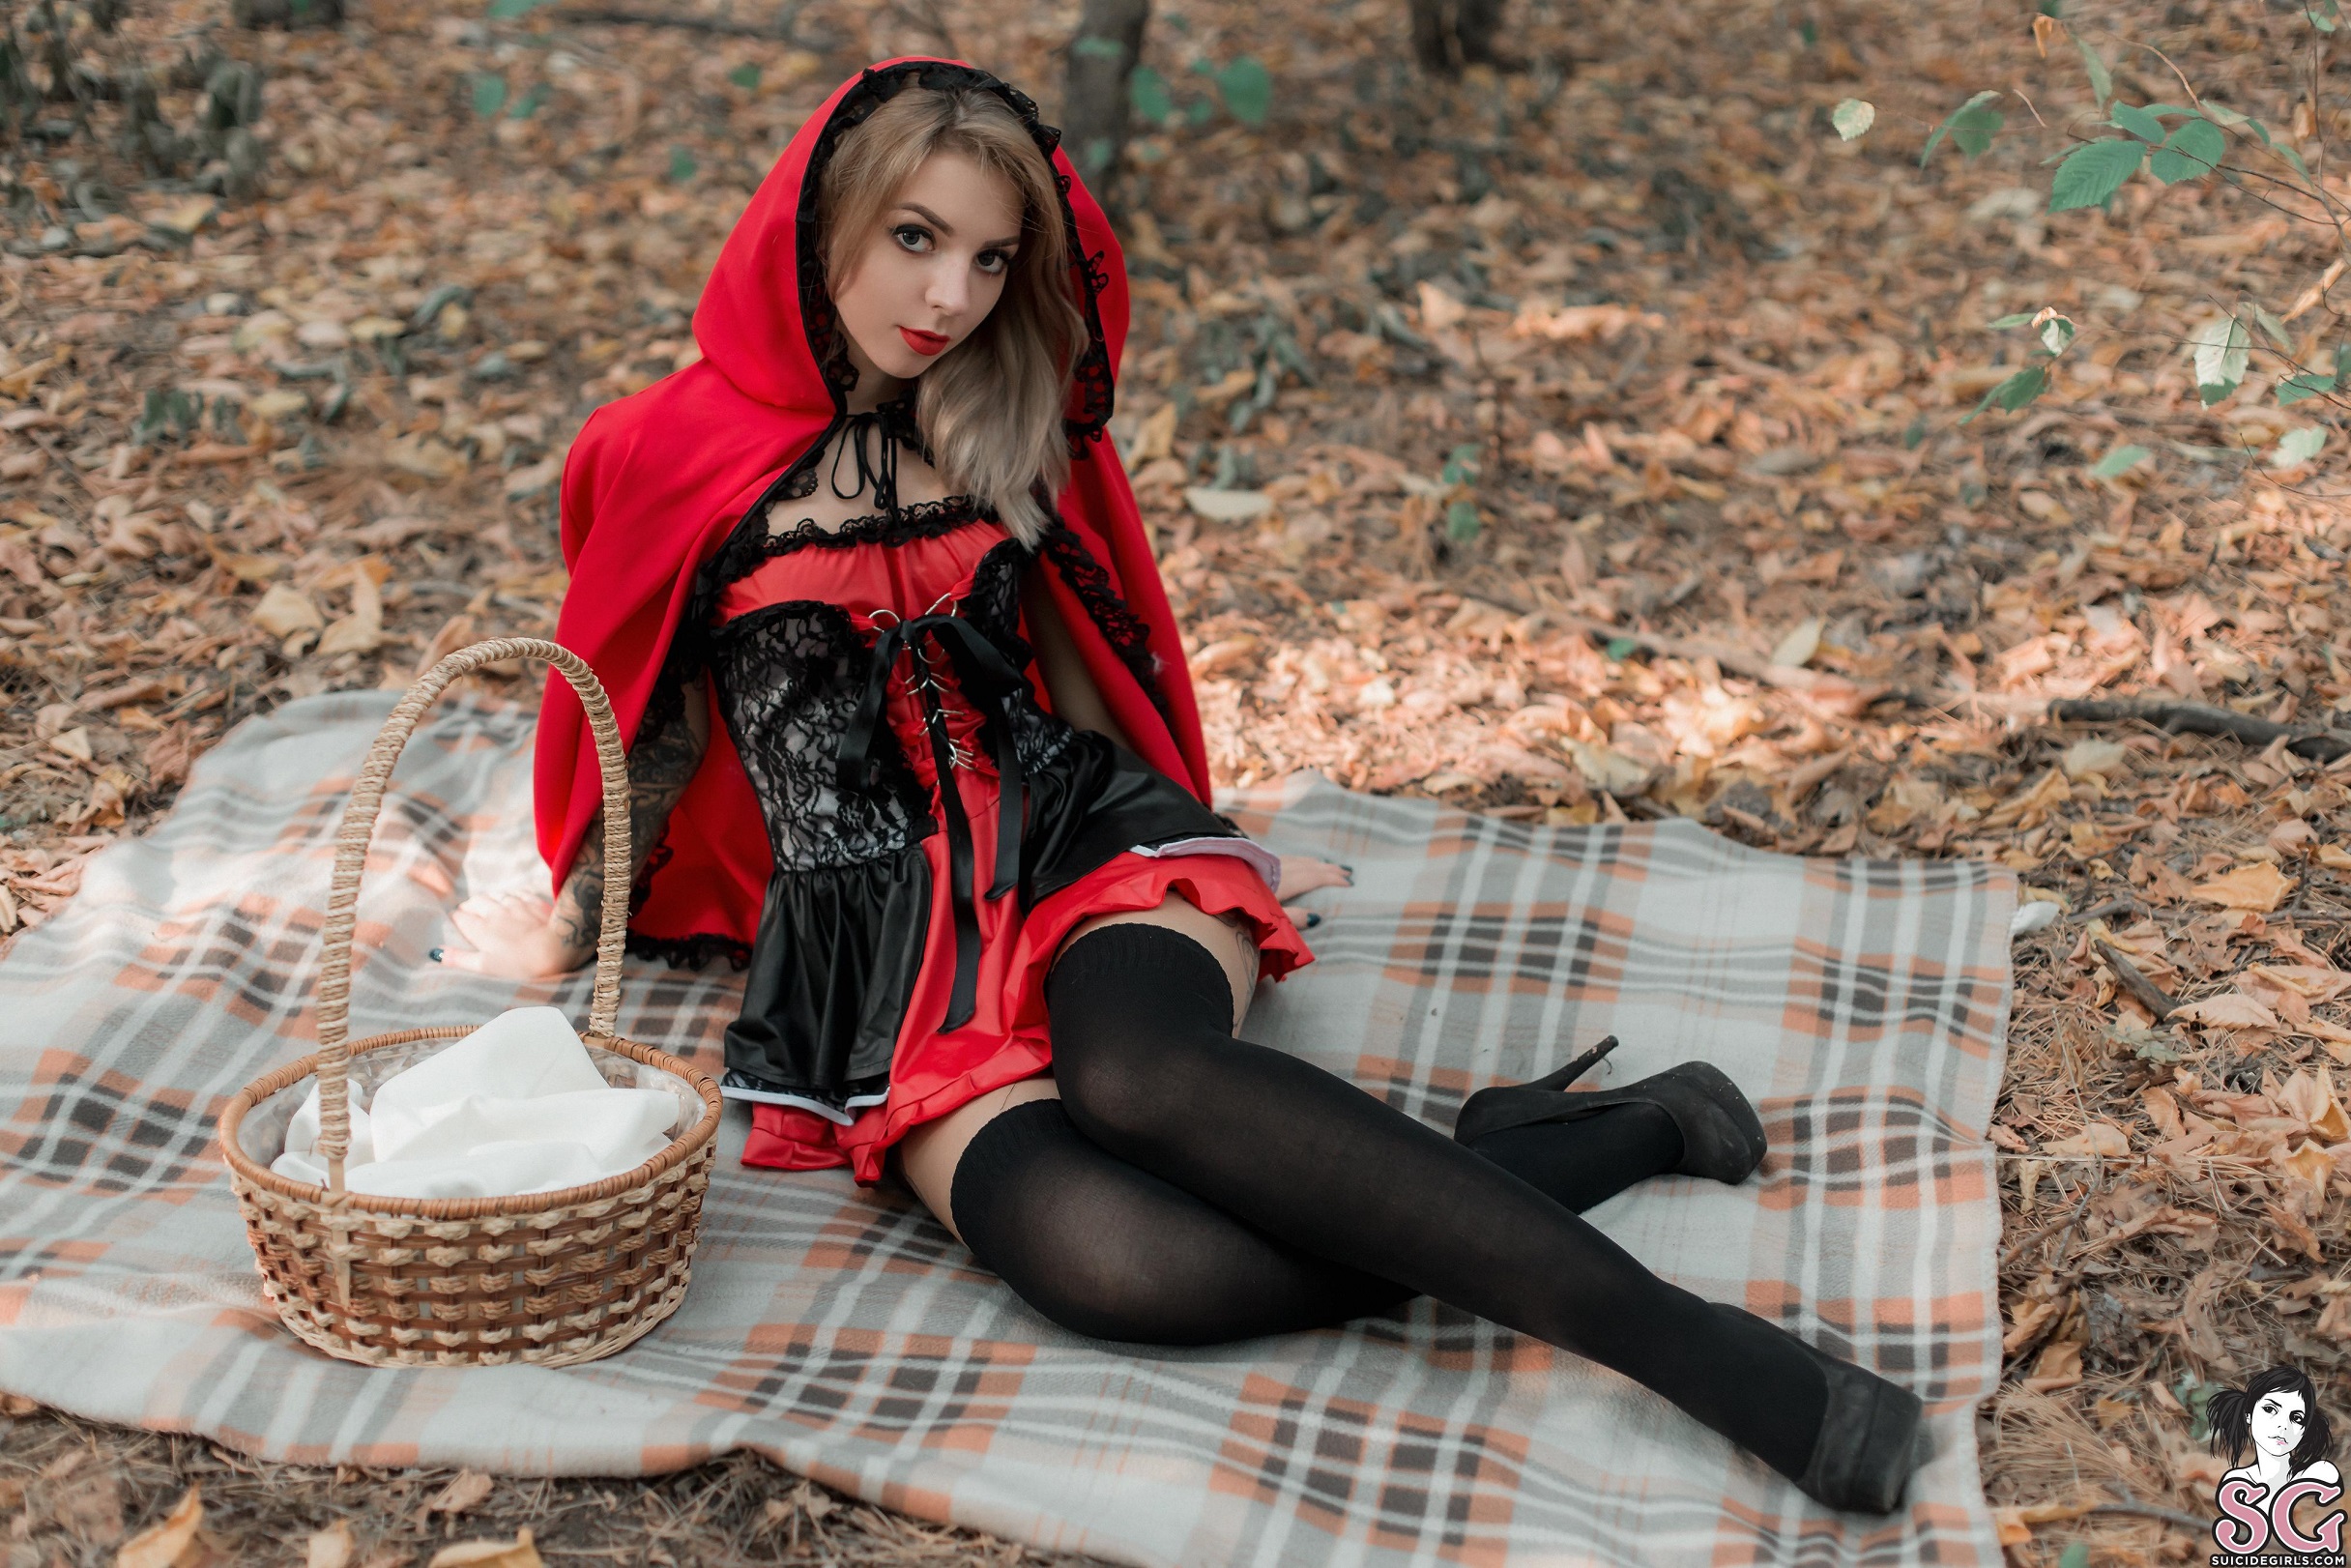 People 2432x1622 Elisa Rose women model blonde looking at viewer red lipstick Little Red Riding Hood cosplay forest blankets cape sitting thigh-highs Suicide Girls